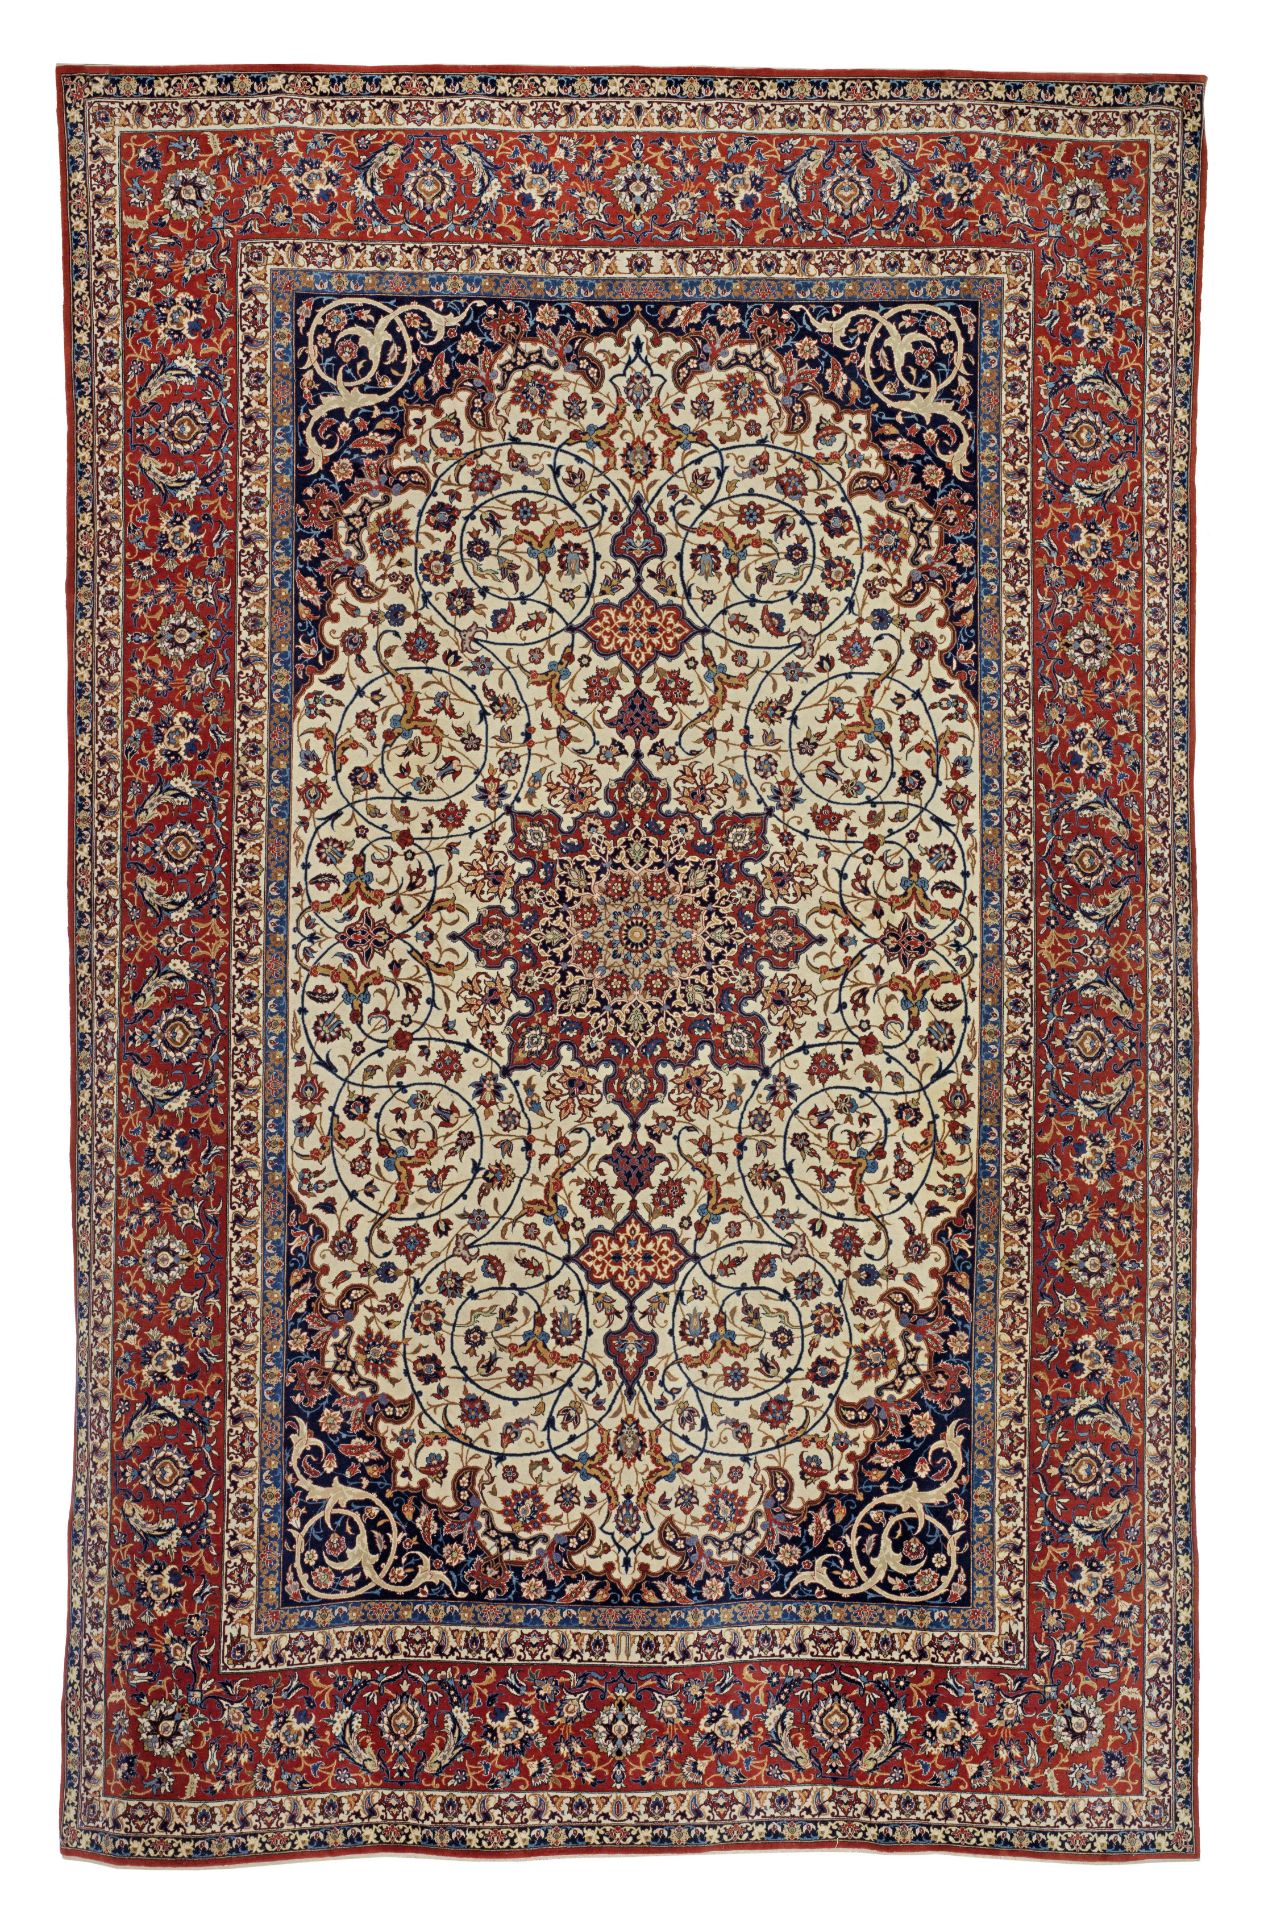 An Isfahan ivory ground carpet Central Persia 342cm x 222cm